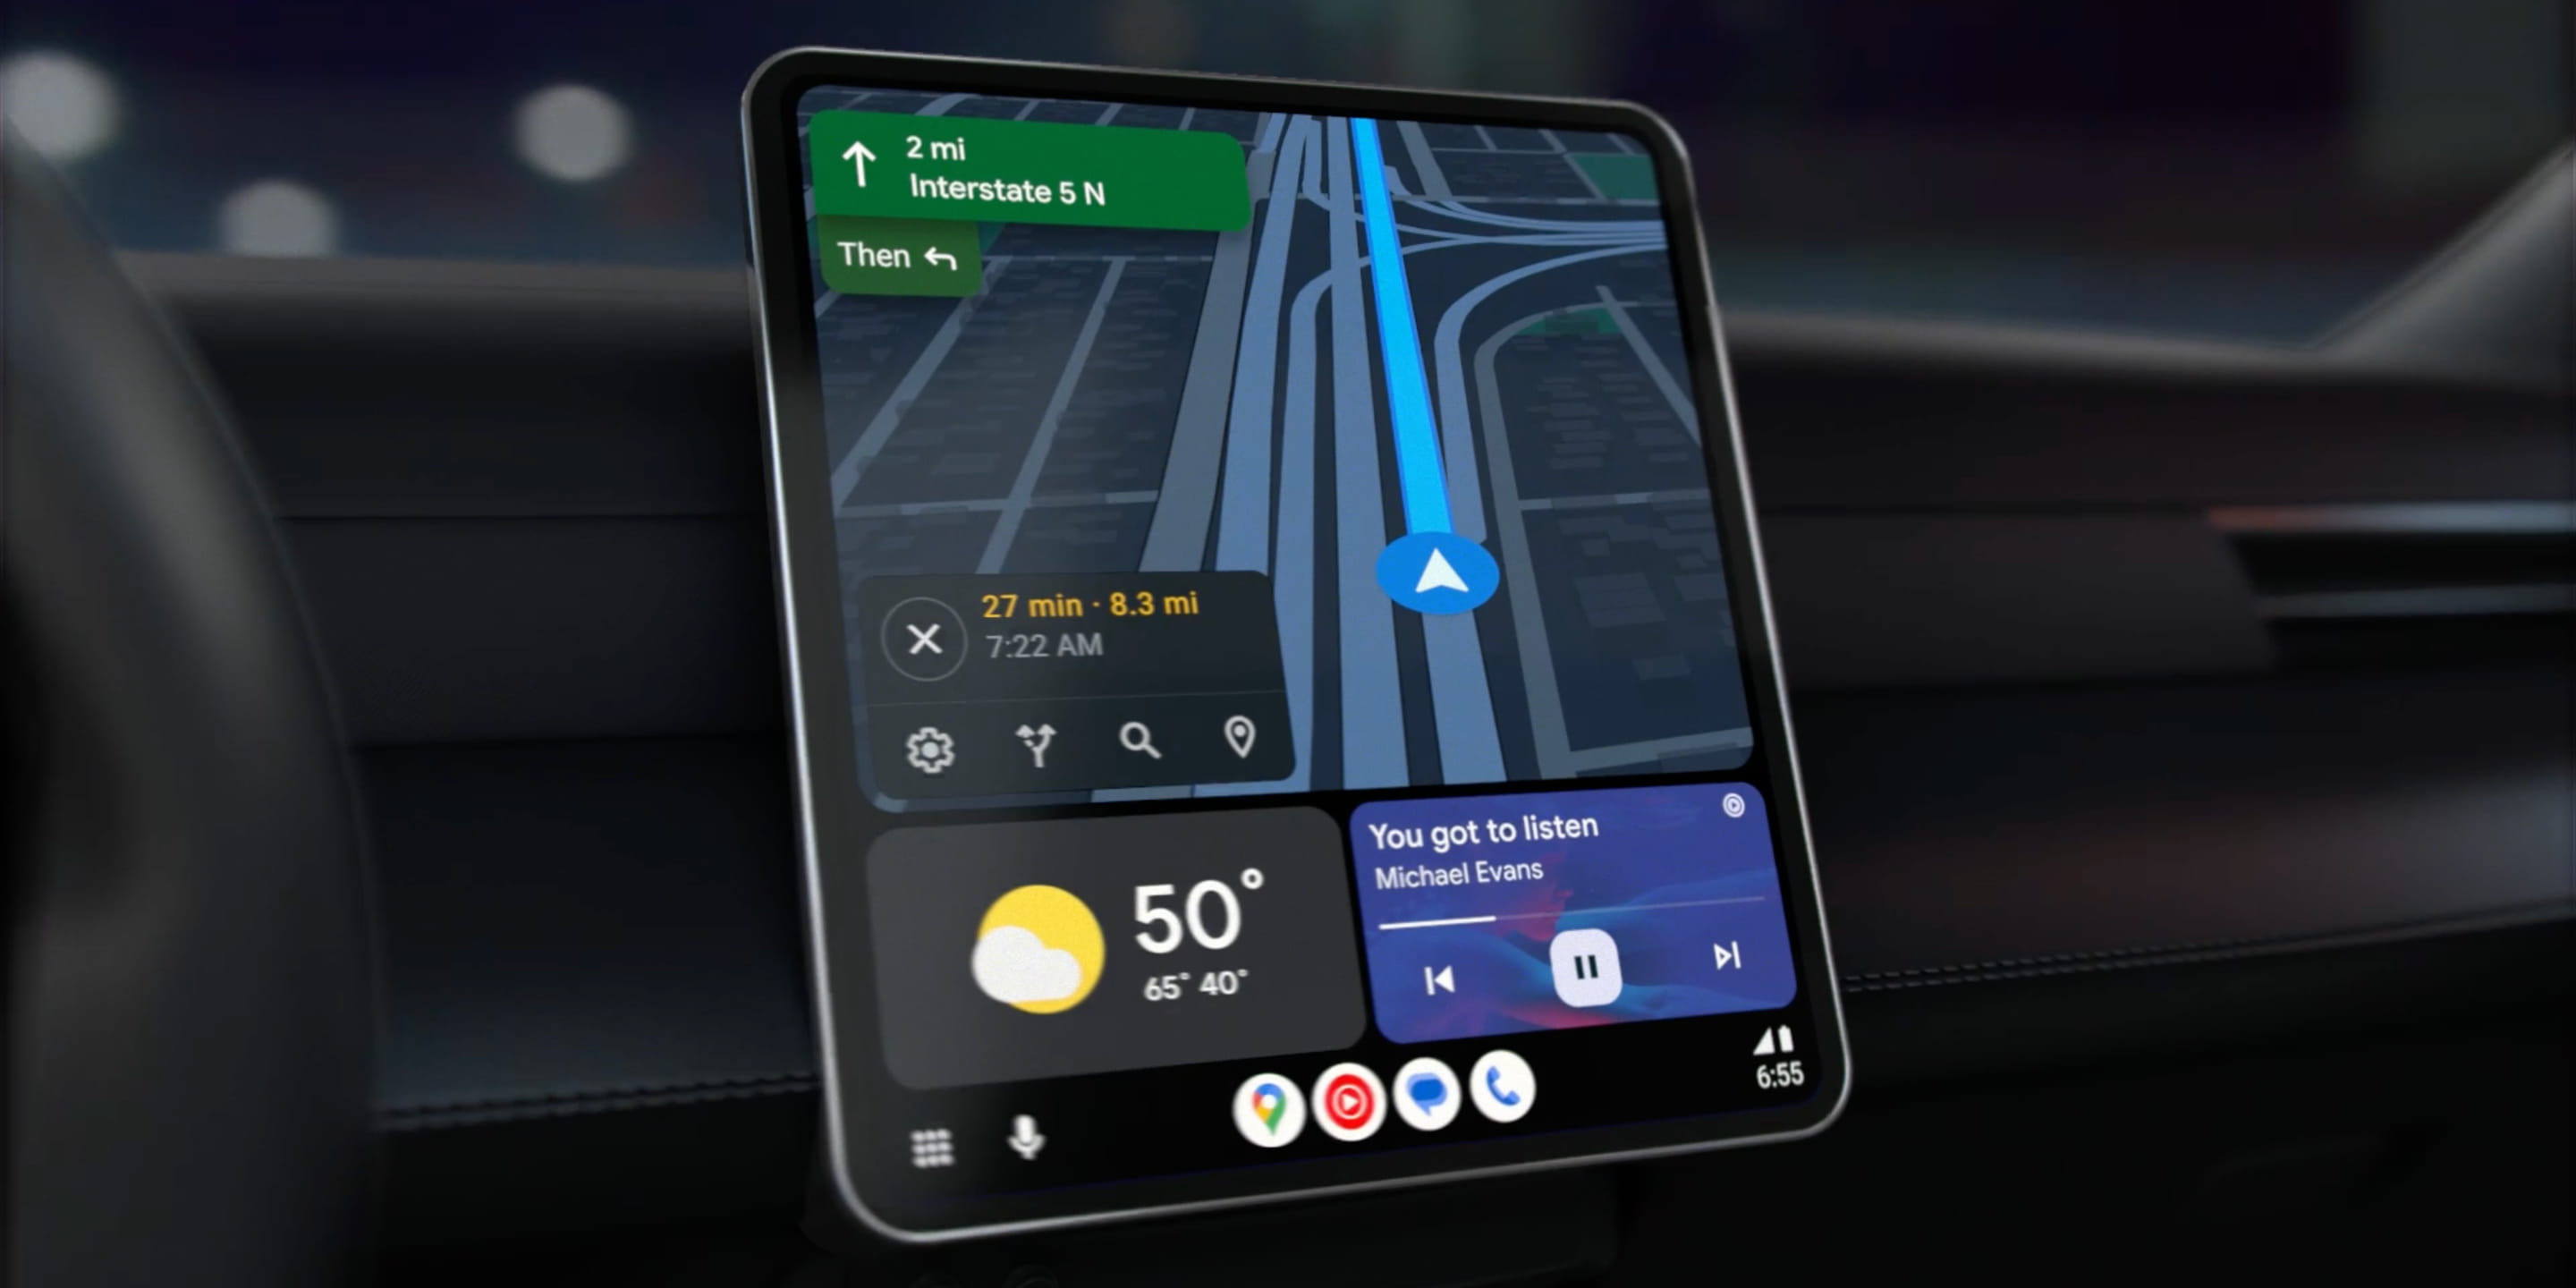 Android Auto split-screen support begins rolling out - 9to5Google